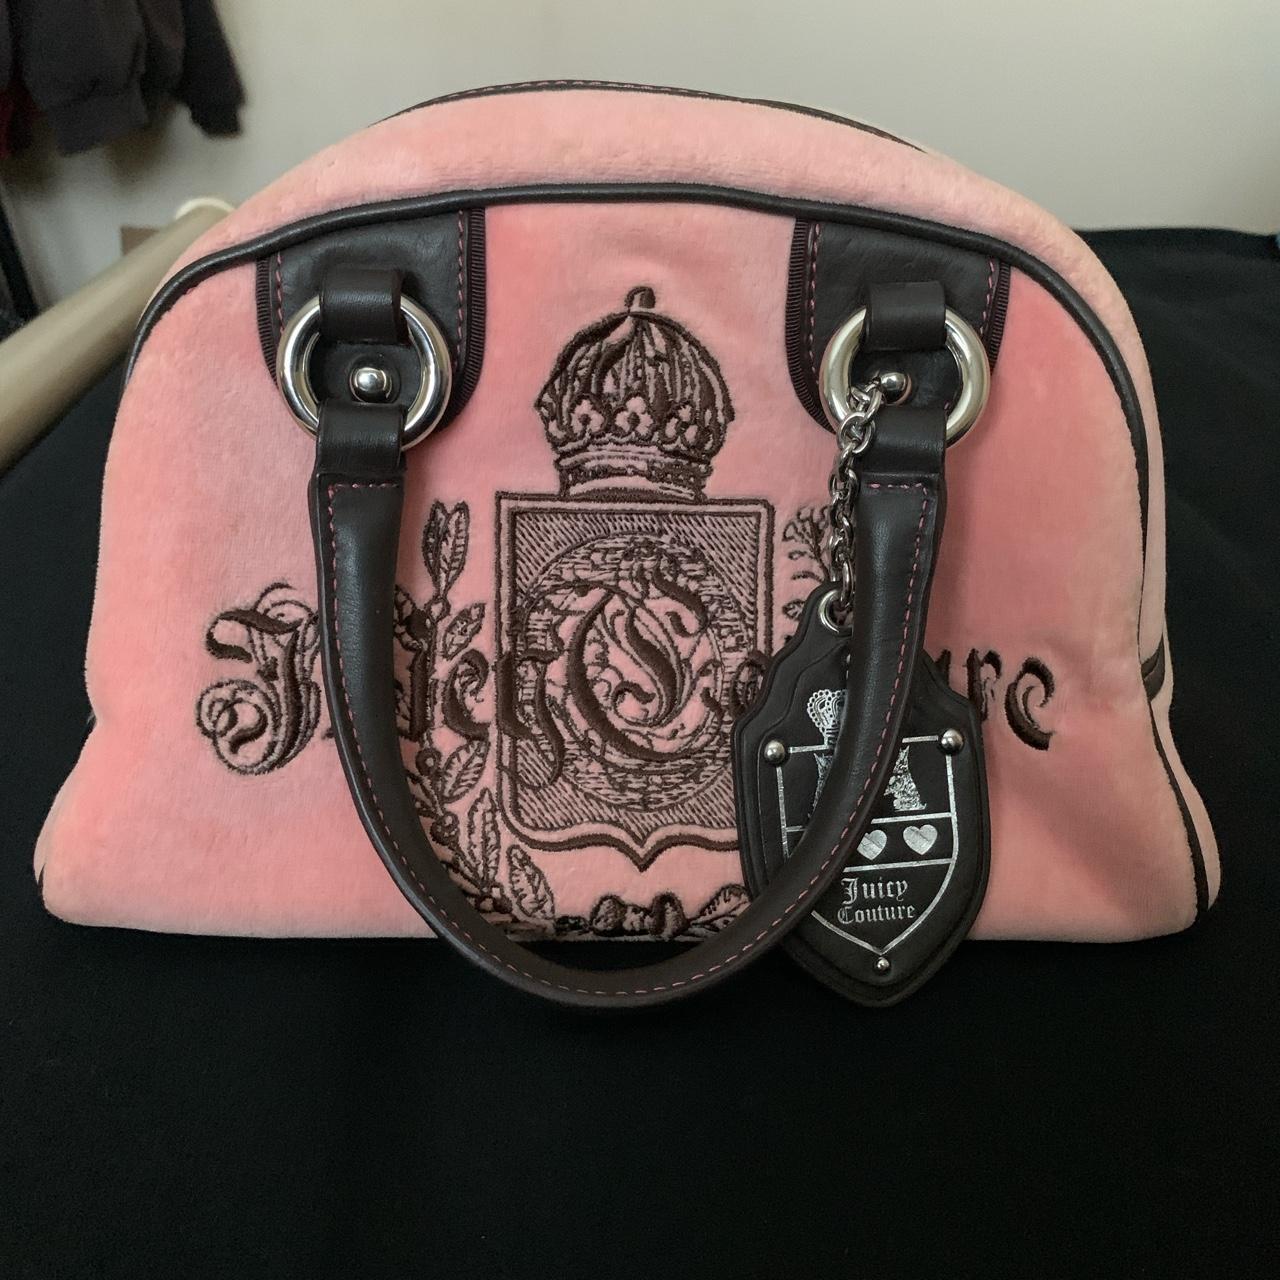 mussio degroot pink plaid purse hard to find - Depop